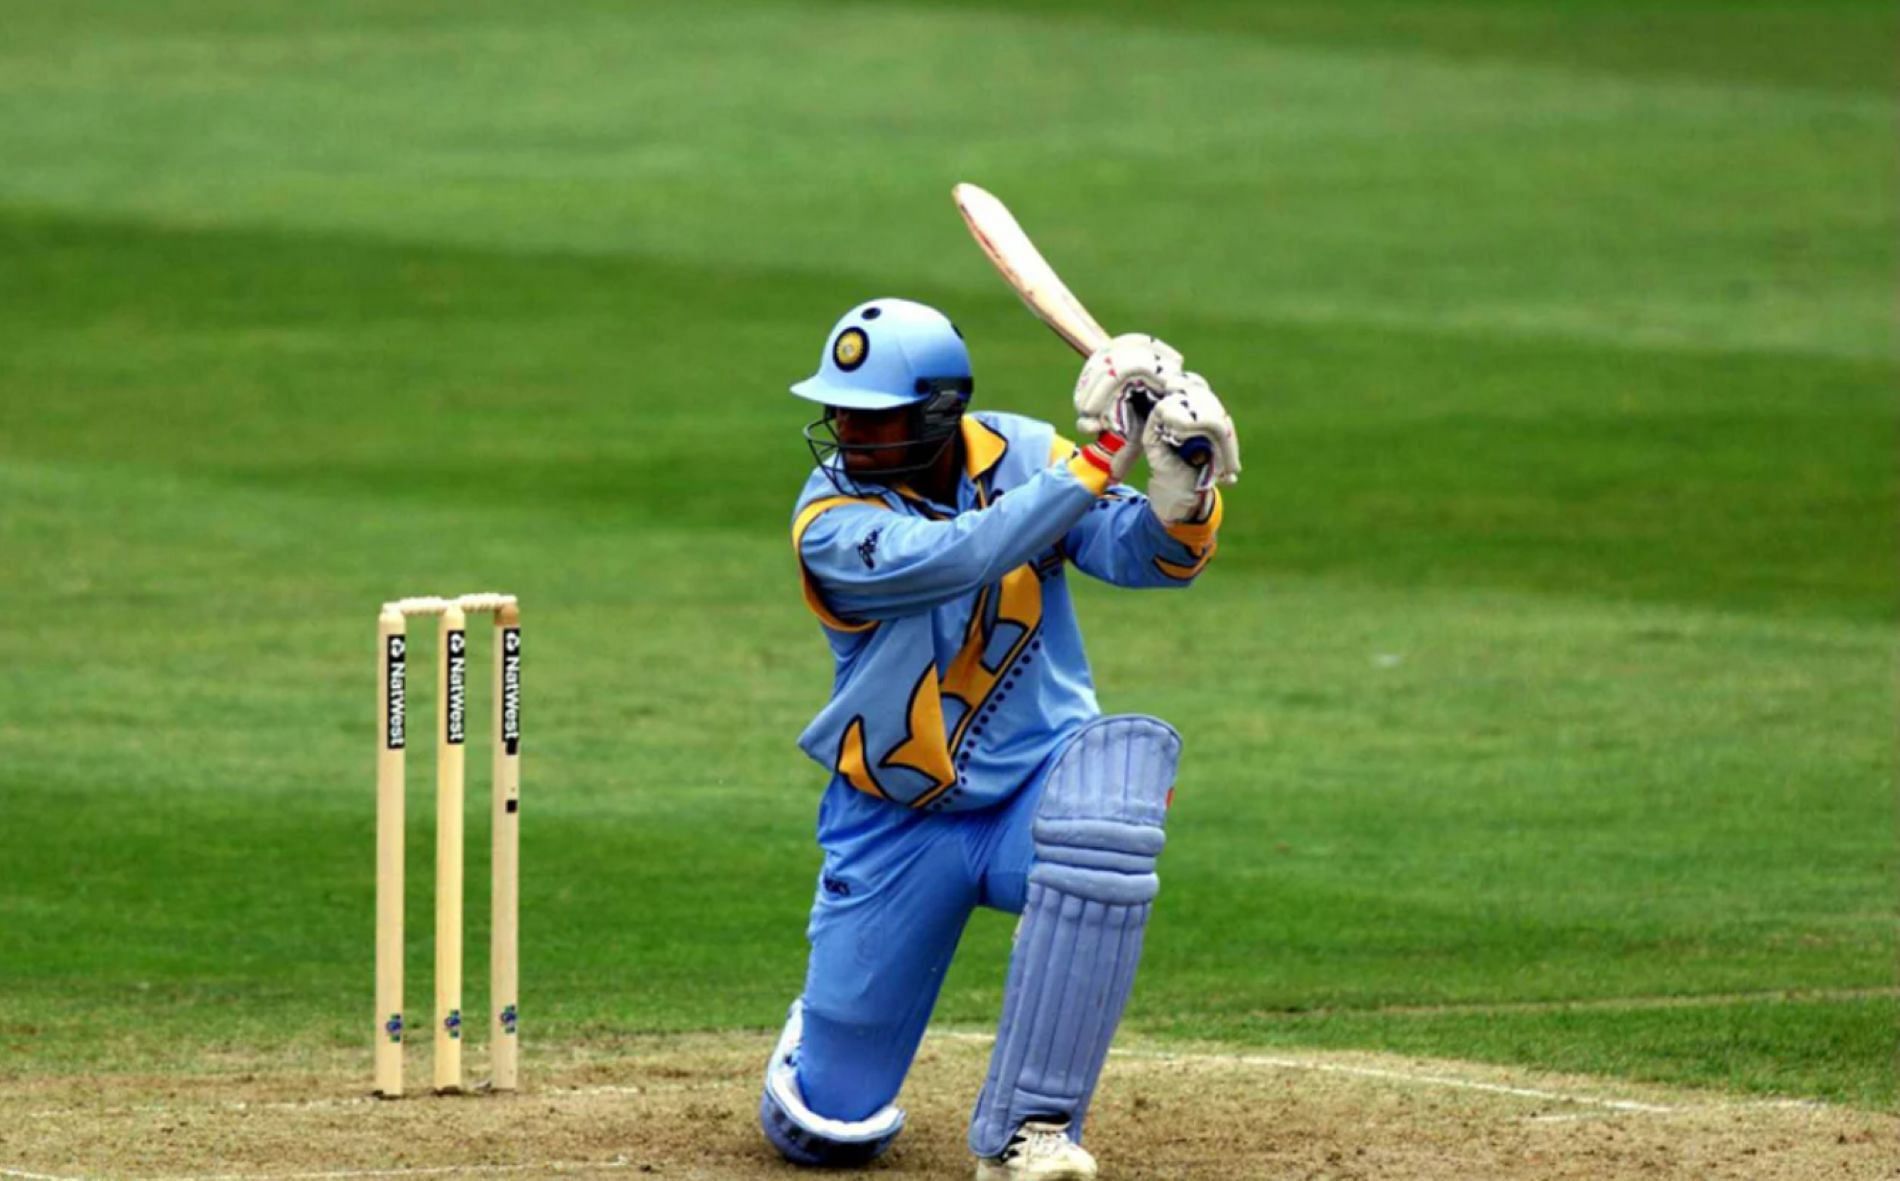 Rahul Dravid became the first Indian batter to score consecutive World Cup centuries.